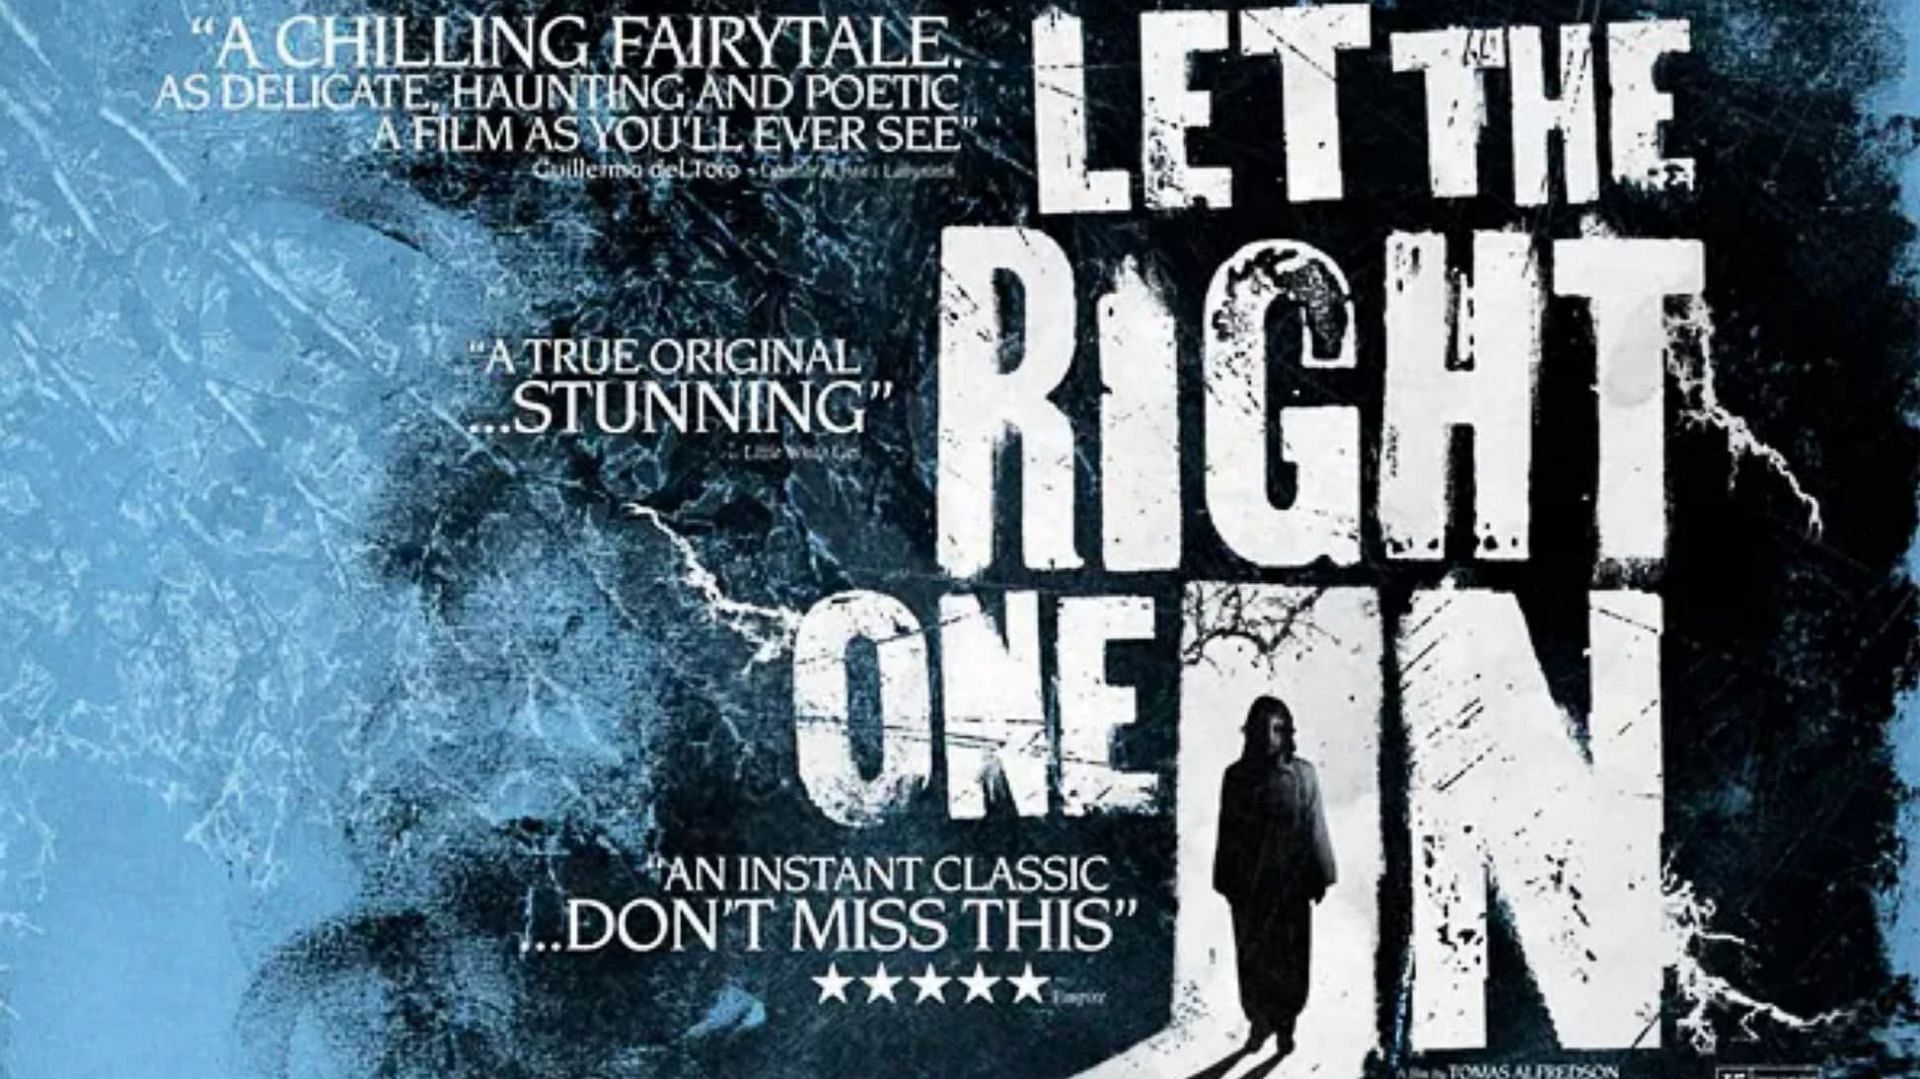 Let the Right One In (Image via Sandrew Metronome)